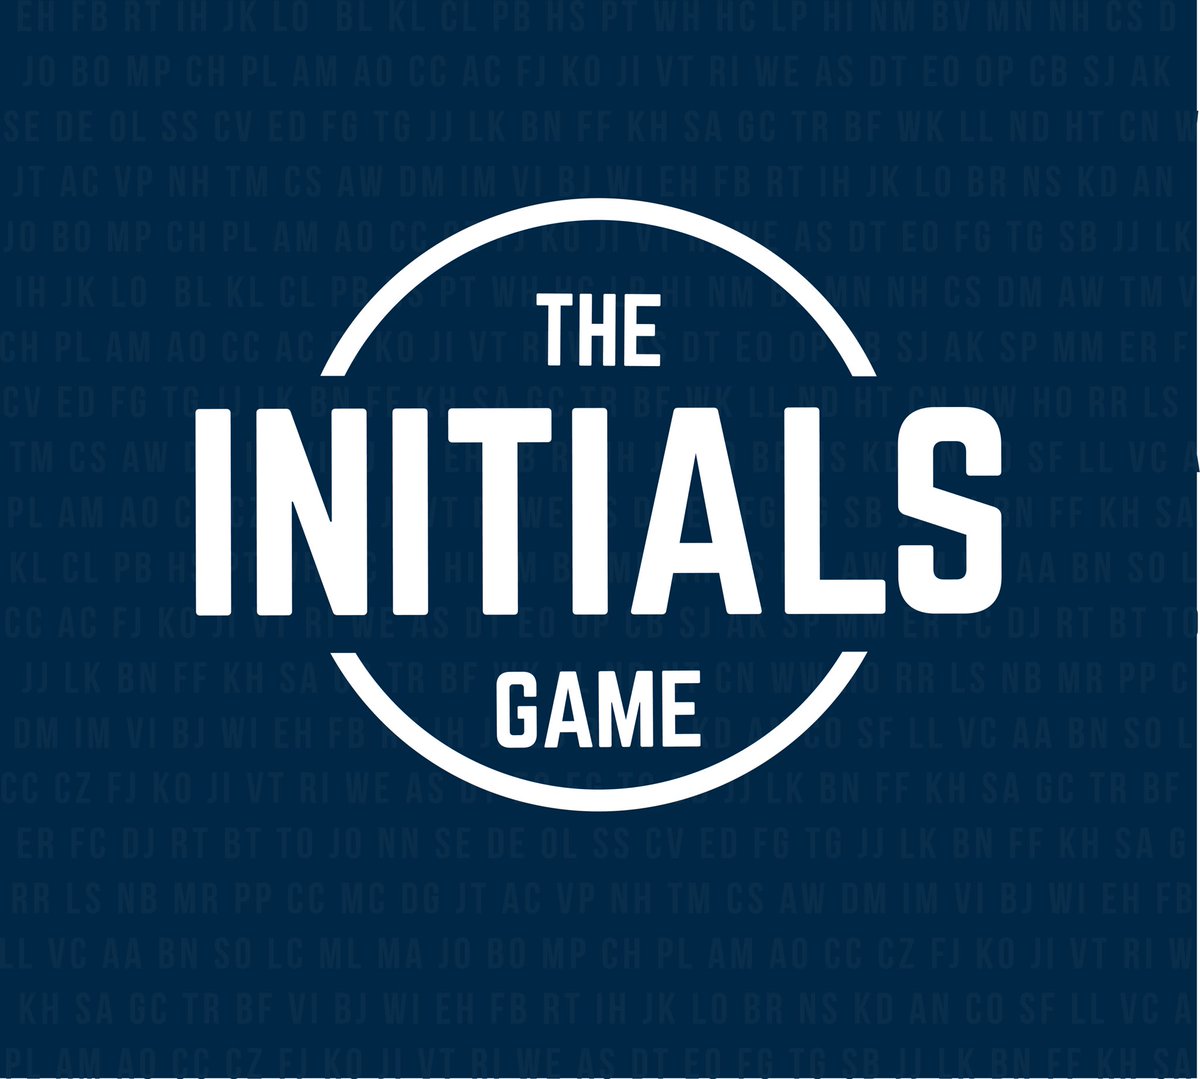 NOW: First ever ALL RUBE game of @InitialsGame live from Las Vegas LISTEN: KFAN.com/listen